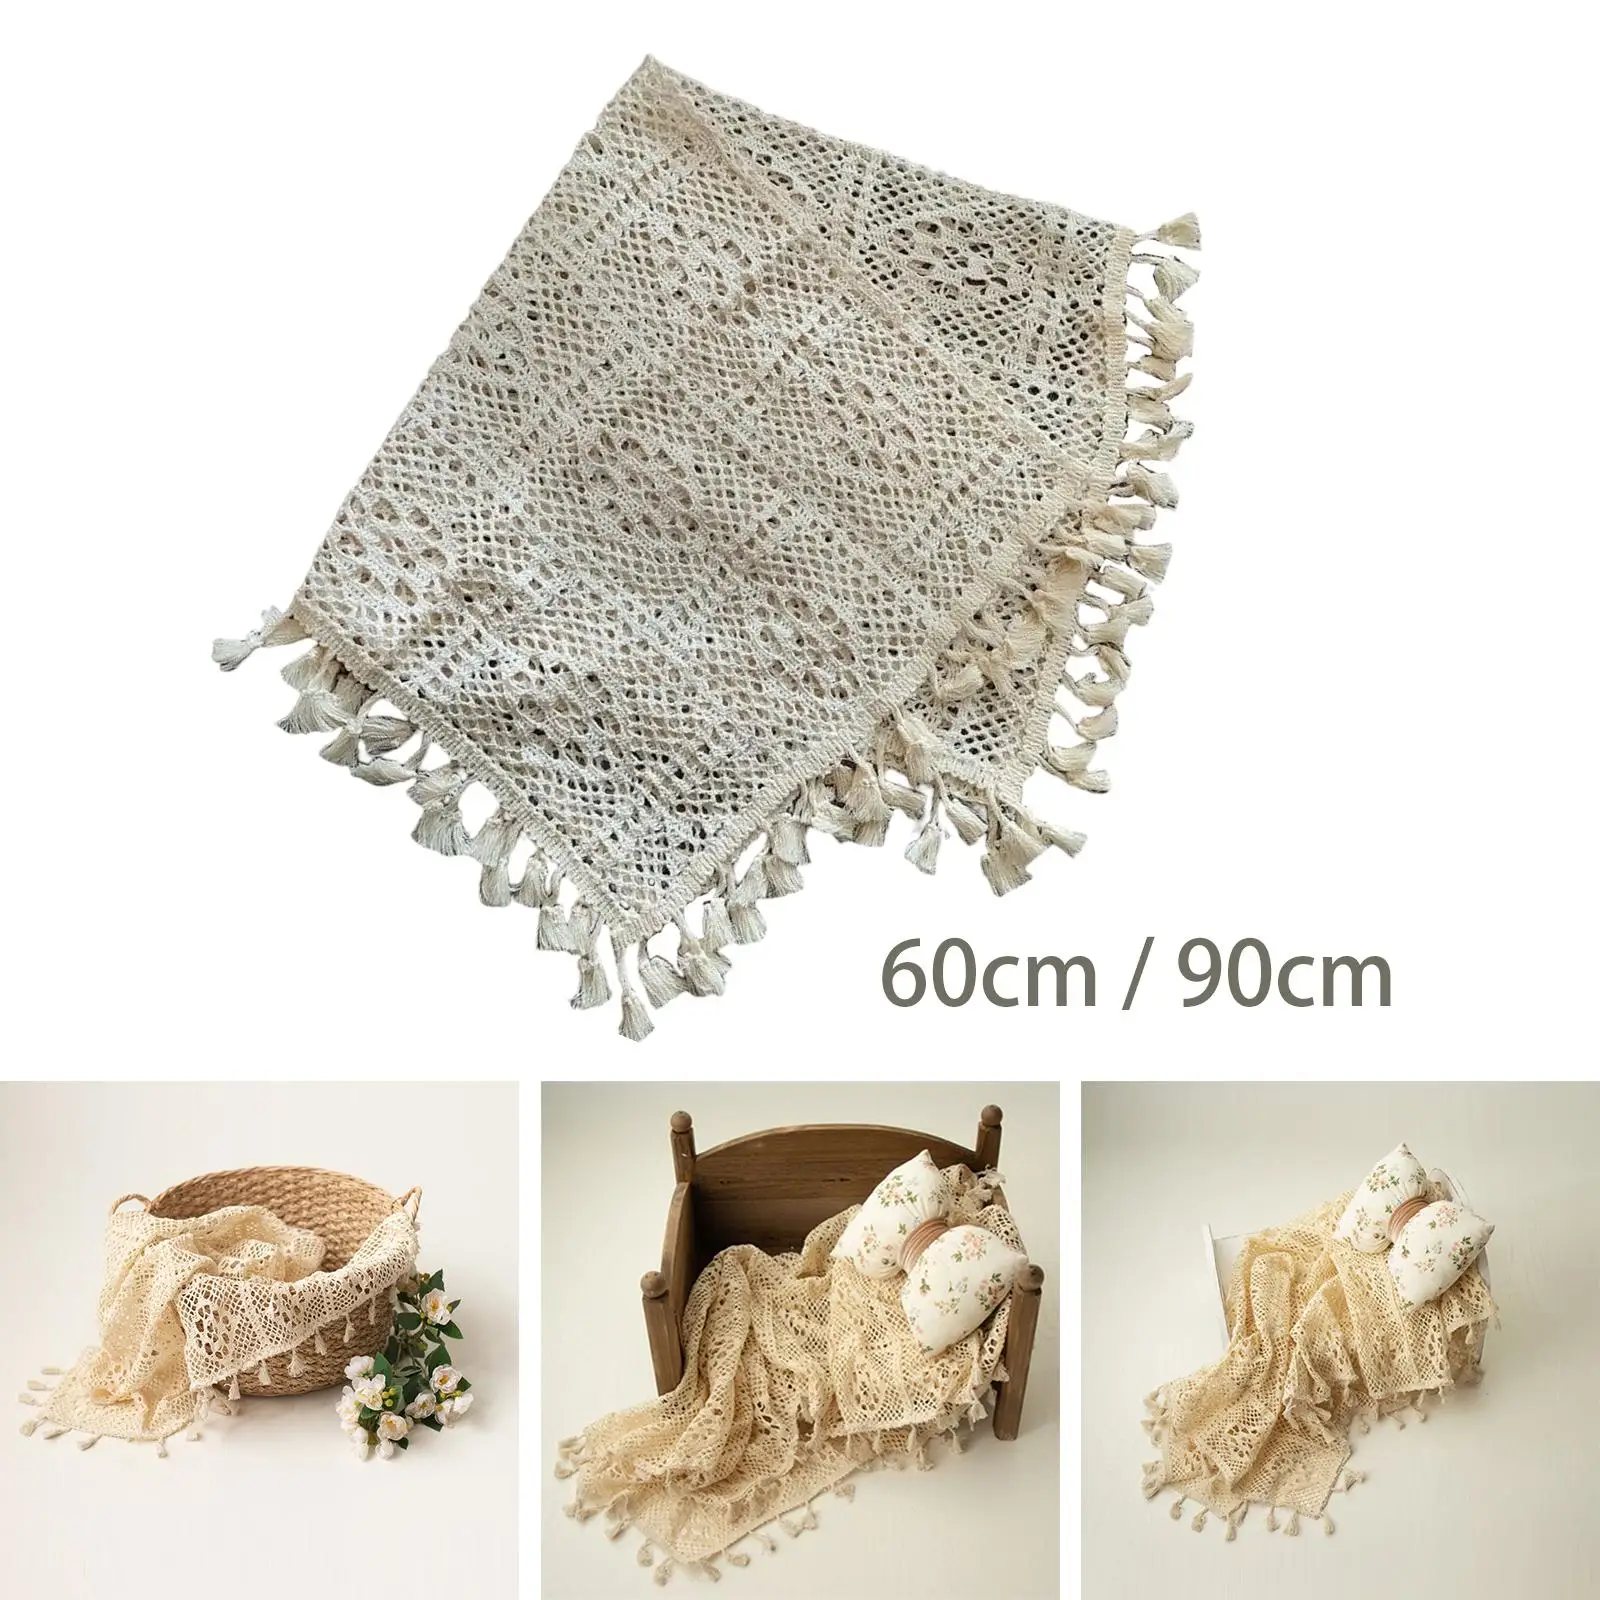 Hollow Weaving Photography Prop Blanket Soft Cotton Ornament Decorative Lightweight Photo Shooting Wrapping Towel Tassel Blanket